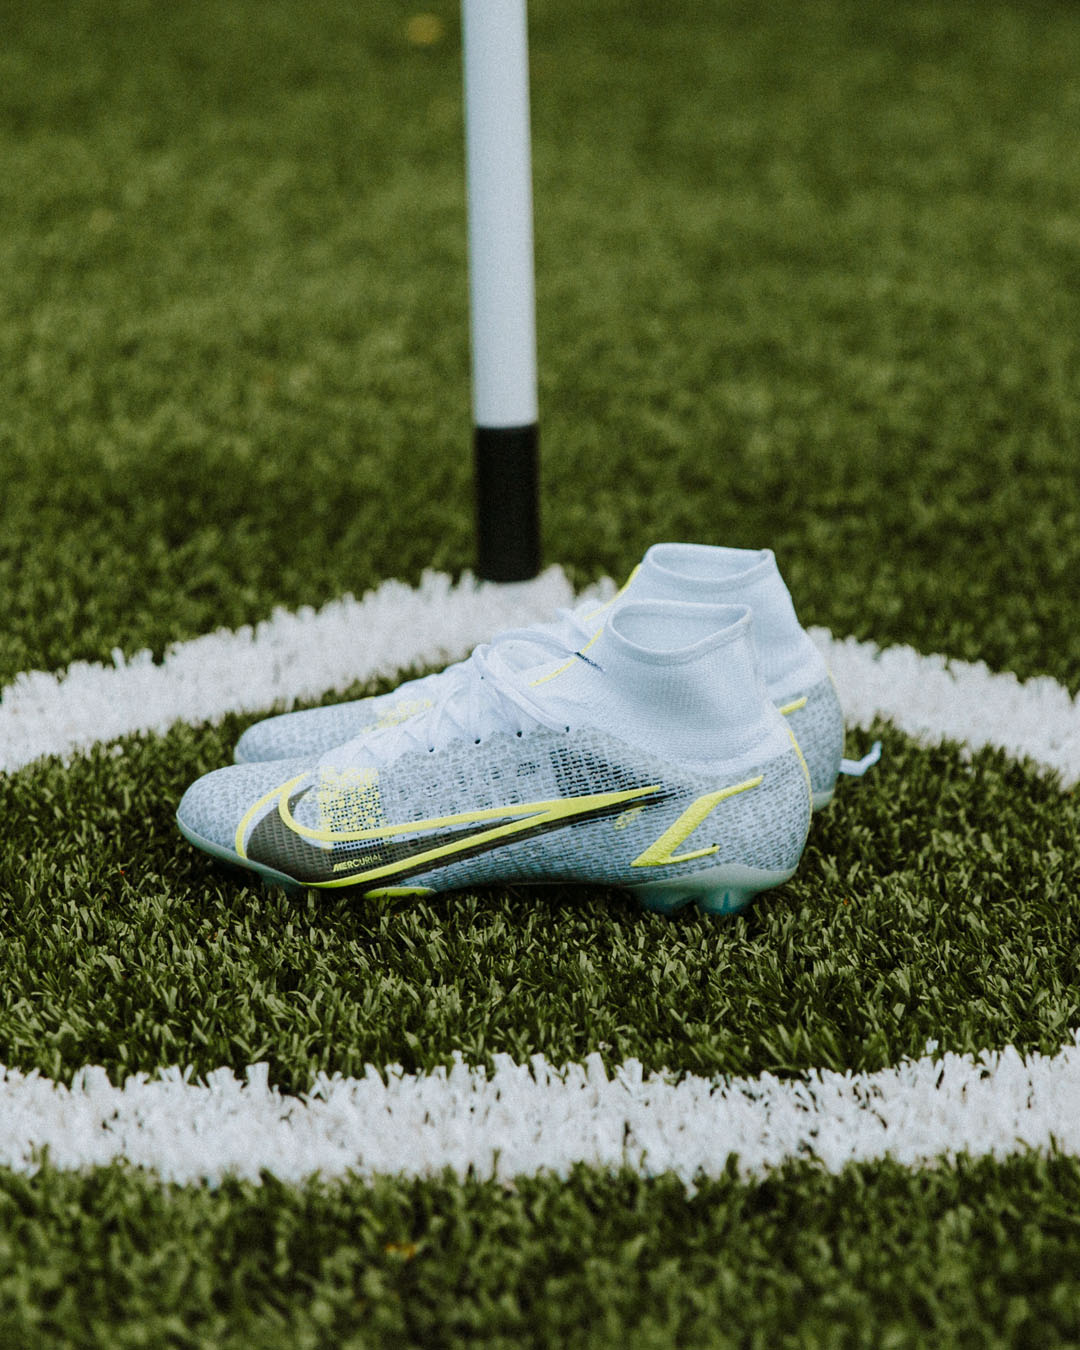 Comercio milicia enlazar Pro:Direct Soccer on Twitter: "Superfly goes Safari ✨ Swipe to see the  latest Nike Mercurial Superfly VIII 'Safari' on pitch 🔍 Available NOW at  Pro:Direct Soccer 📲 Shop here 🛒 https://t.co/1mwt4NjPBa  https://t.co/tMEYWdedQA" /